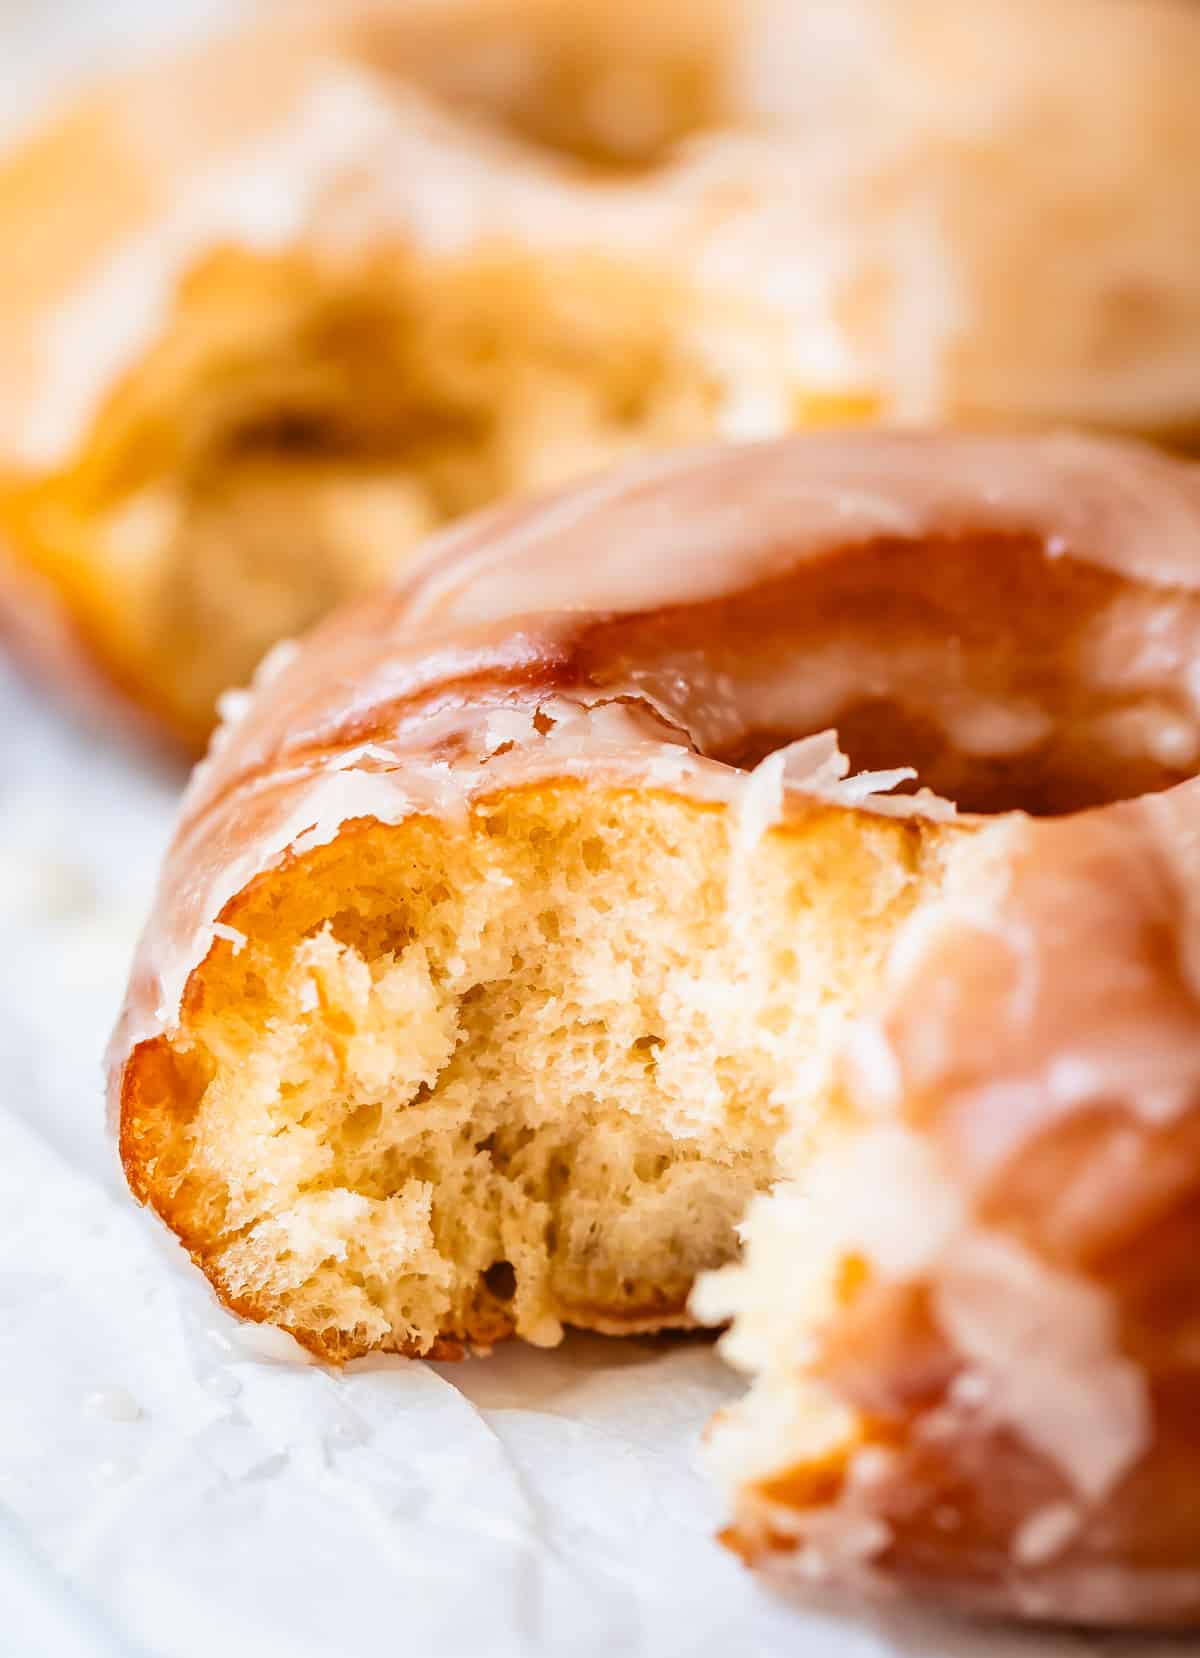 close up of a donut with a bite in it, showing the fluffy, yeasty insides.